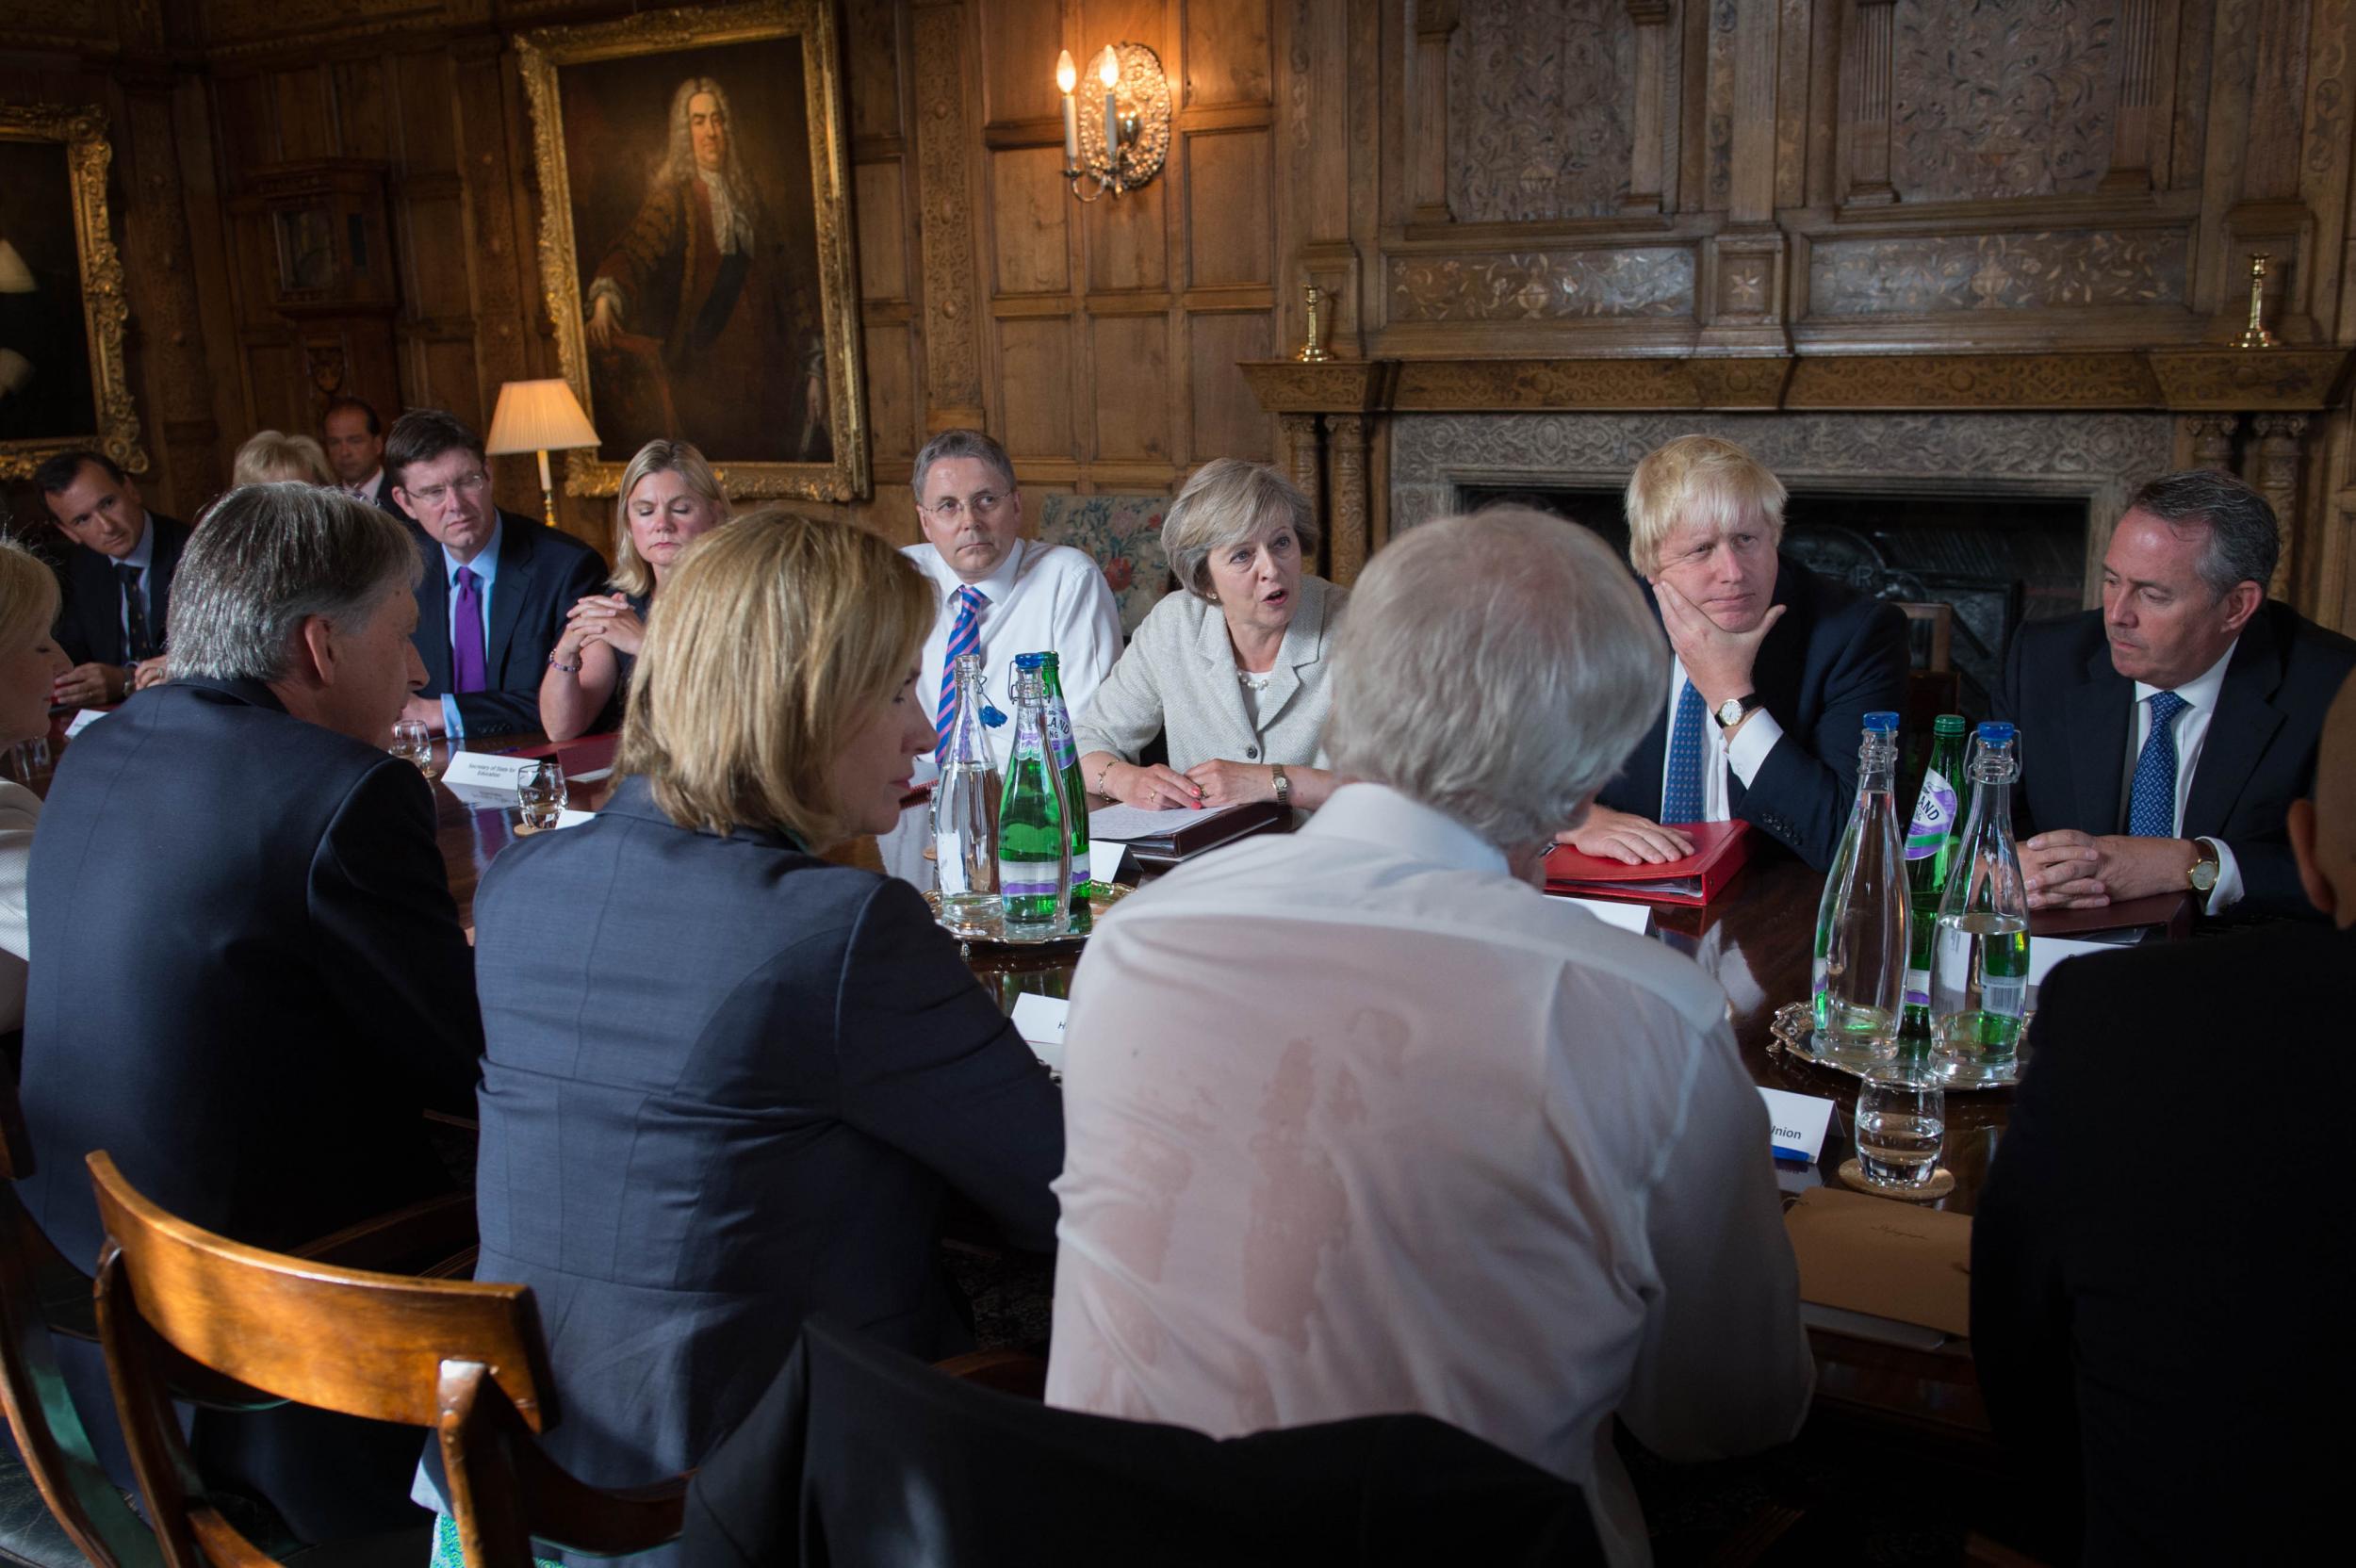 Theresa May last held a Brexit retreat at Chequers in August 2016, two months after becoming Prime Minister